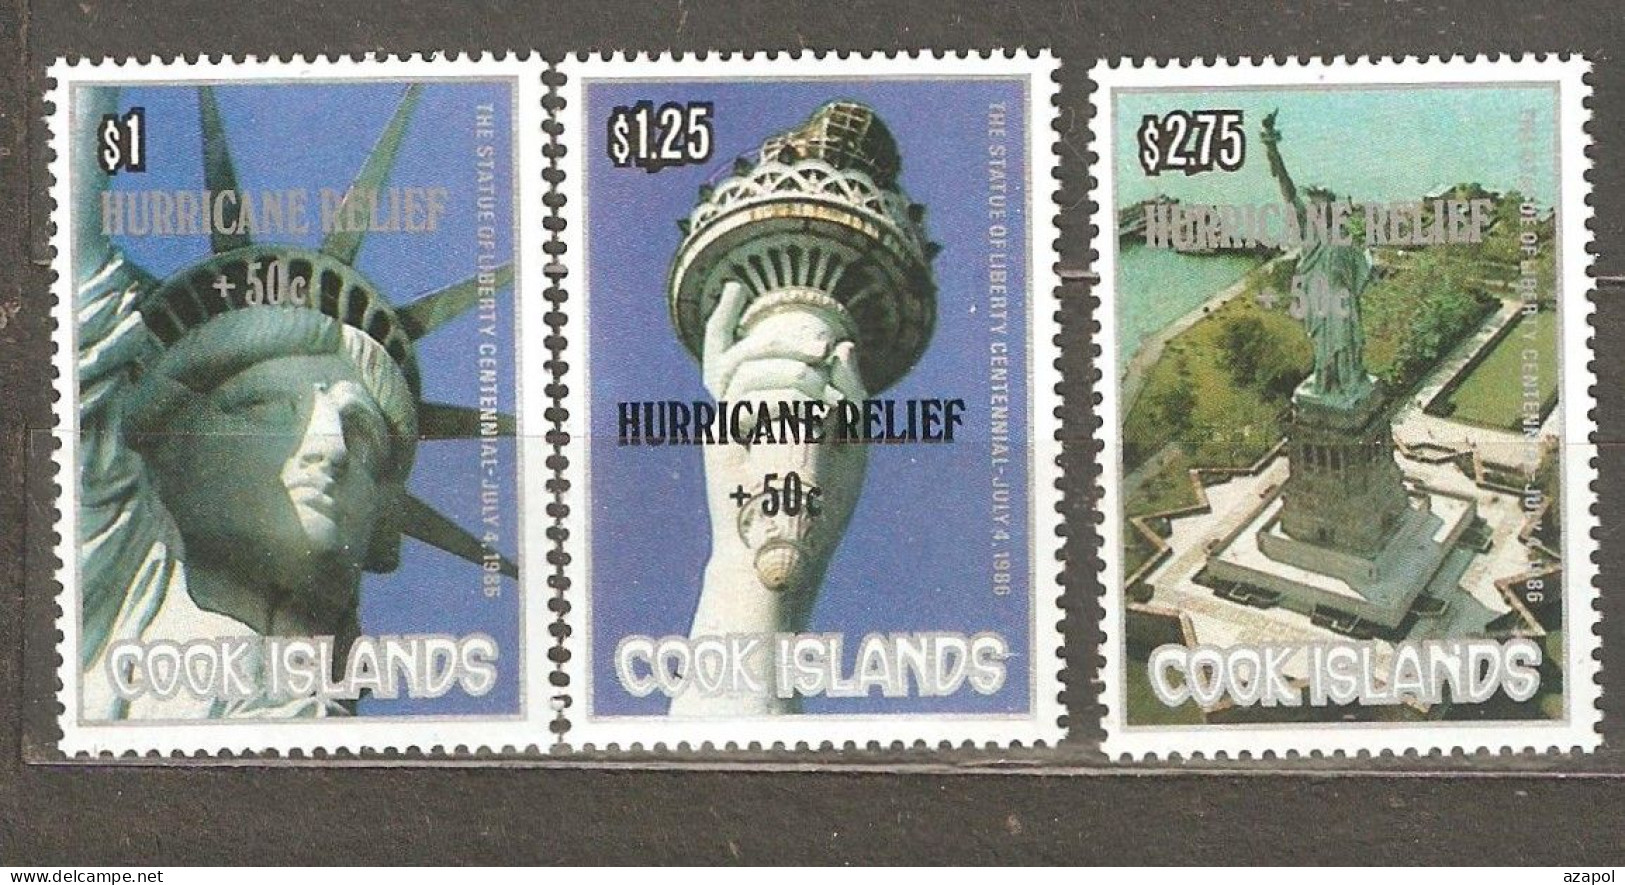 Cook Islands: Full Set Of 3 Mint Stamps - Overprint, 100 Years Of Statue Of Liberty, 1987, Mi#1220-2, MNH. - Islas Cook